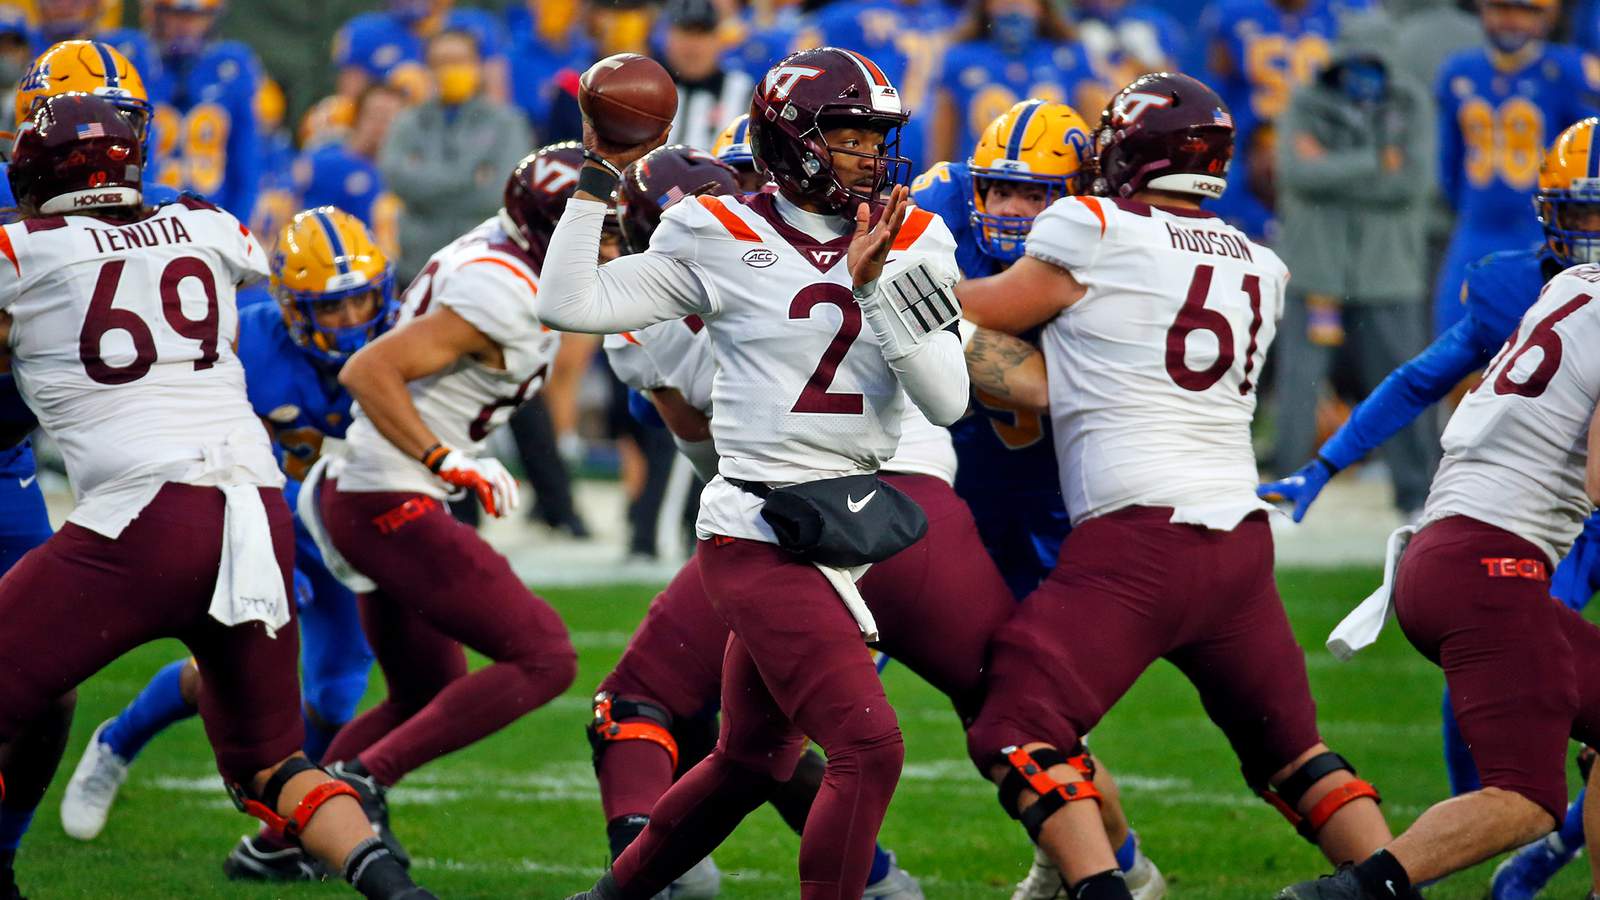 Virginia Tech to decide bowl future in next 24 hours